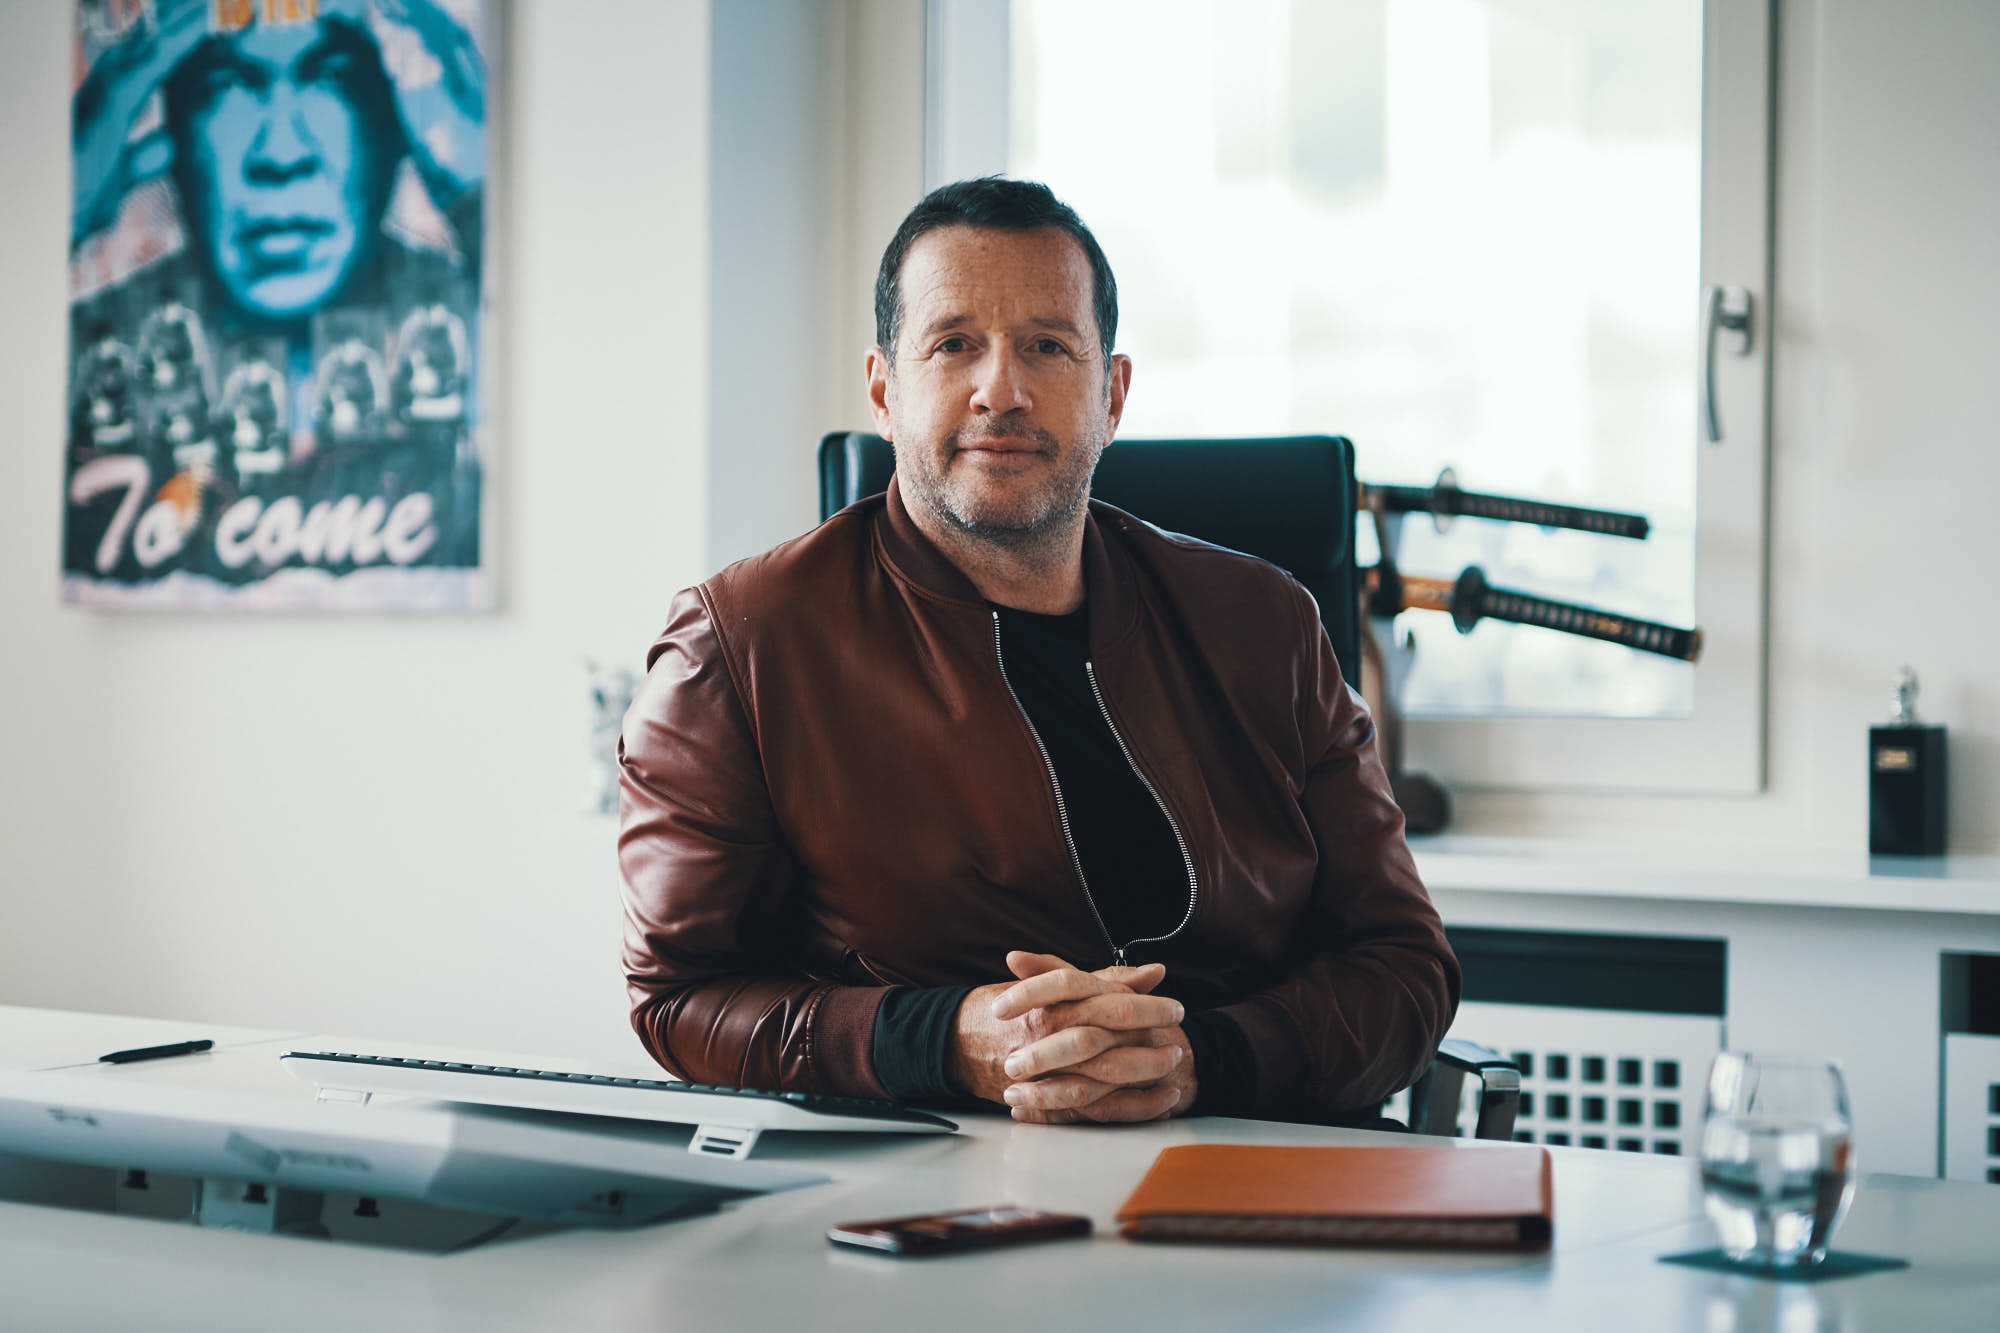 François-Henry Bennahmias, fun-loving CEO of watchmaker Audemars Piguet, talks about transforming the company by courting rappers and sports stars. Photo: Handout